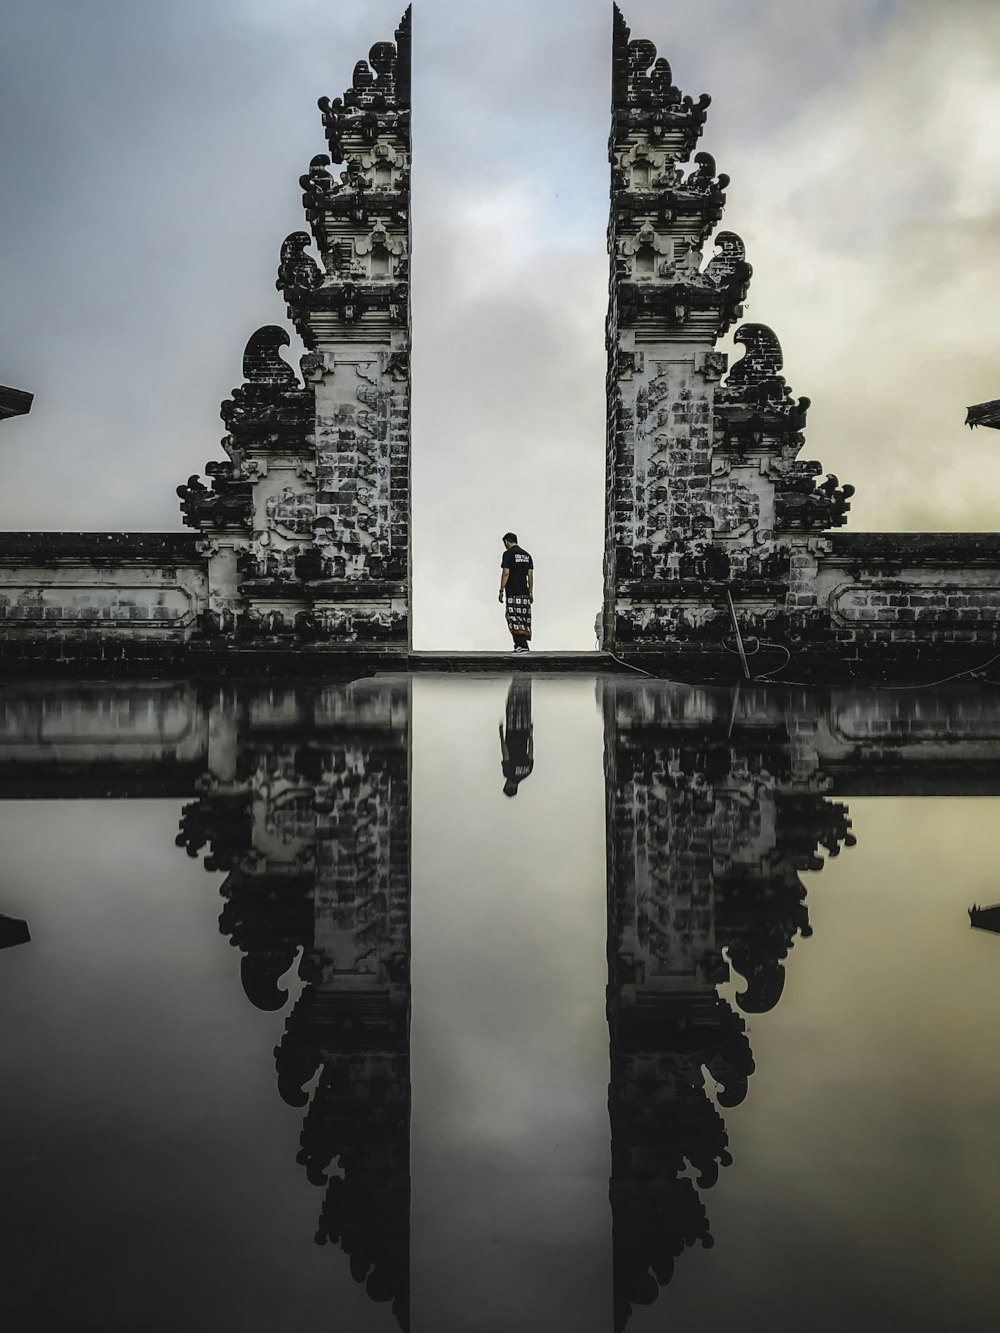 100+ Beautiful Bali Images | Download Free Pictures On Unsplash